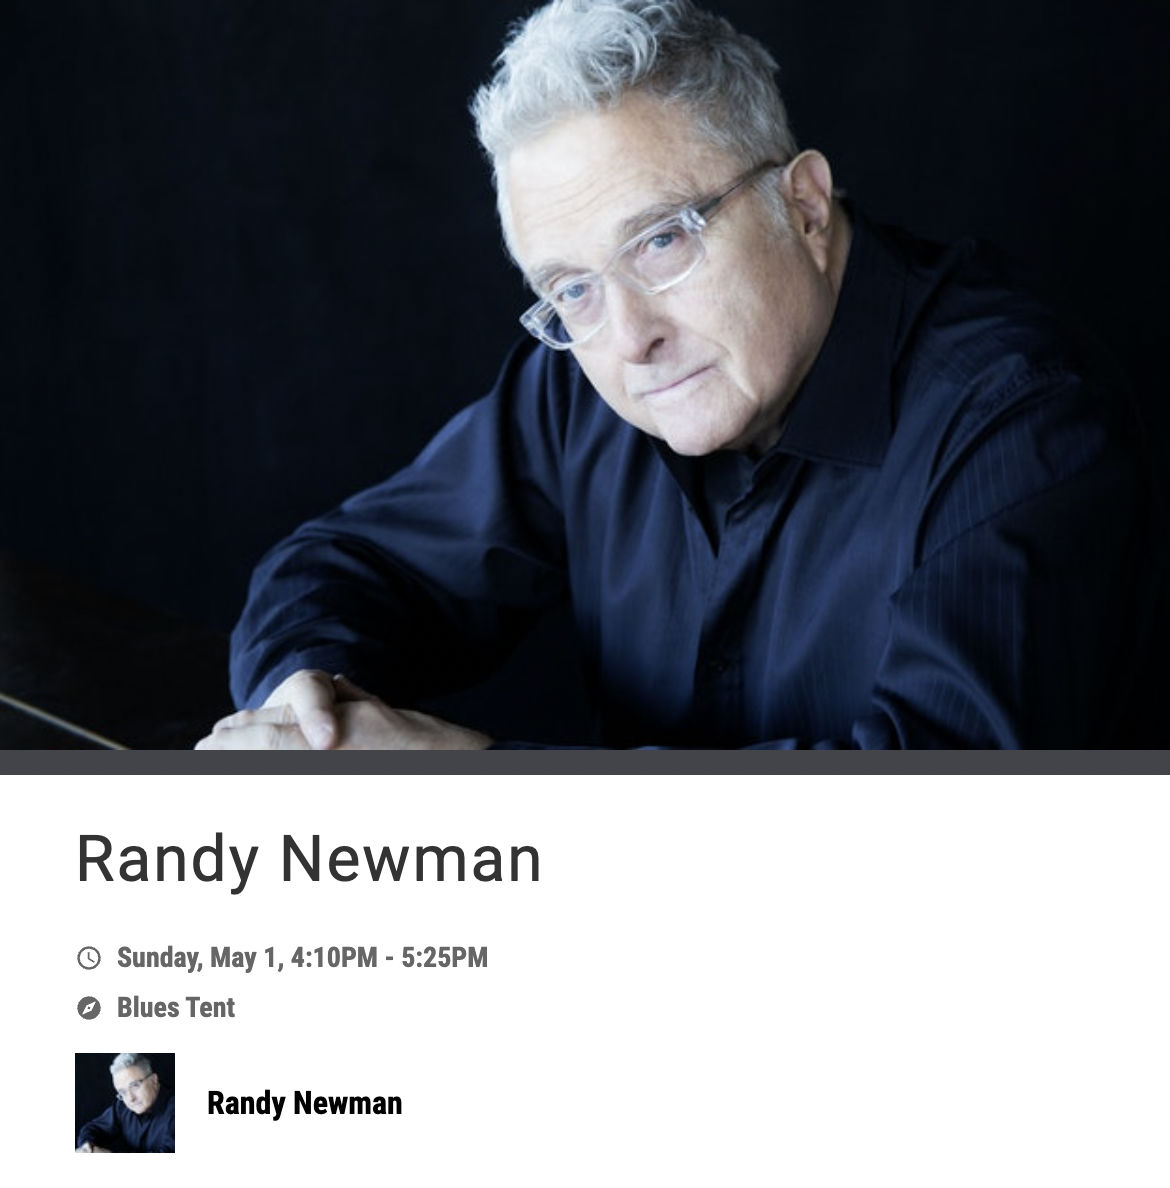 Randy performs in the JazzFest's Blues Tent today (May 1) from 4:10 to 5:25, New Orleans time.